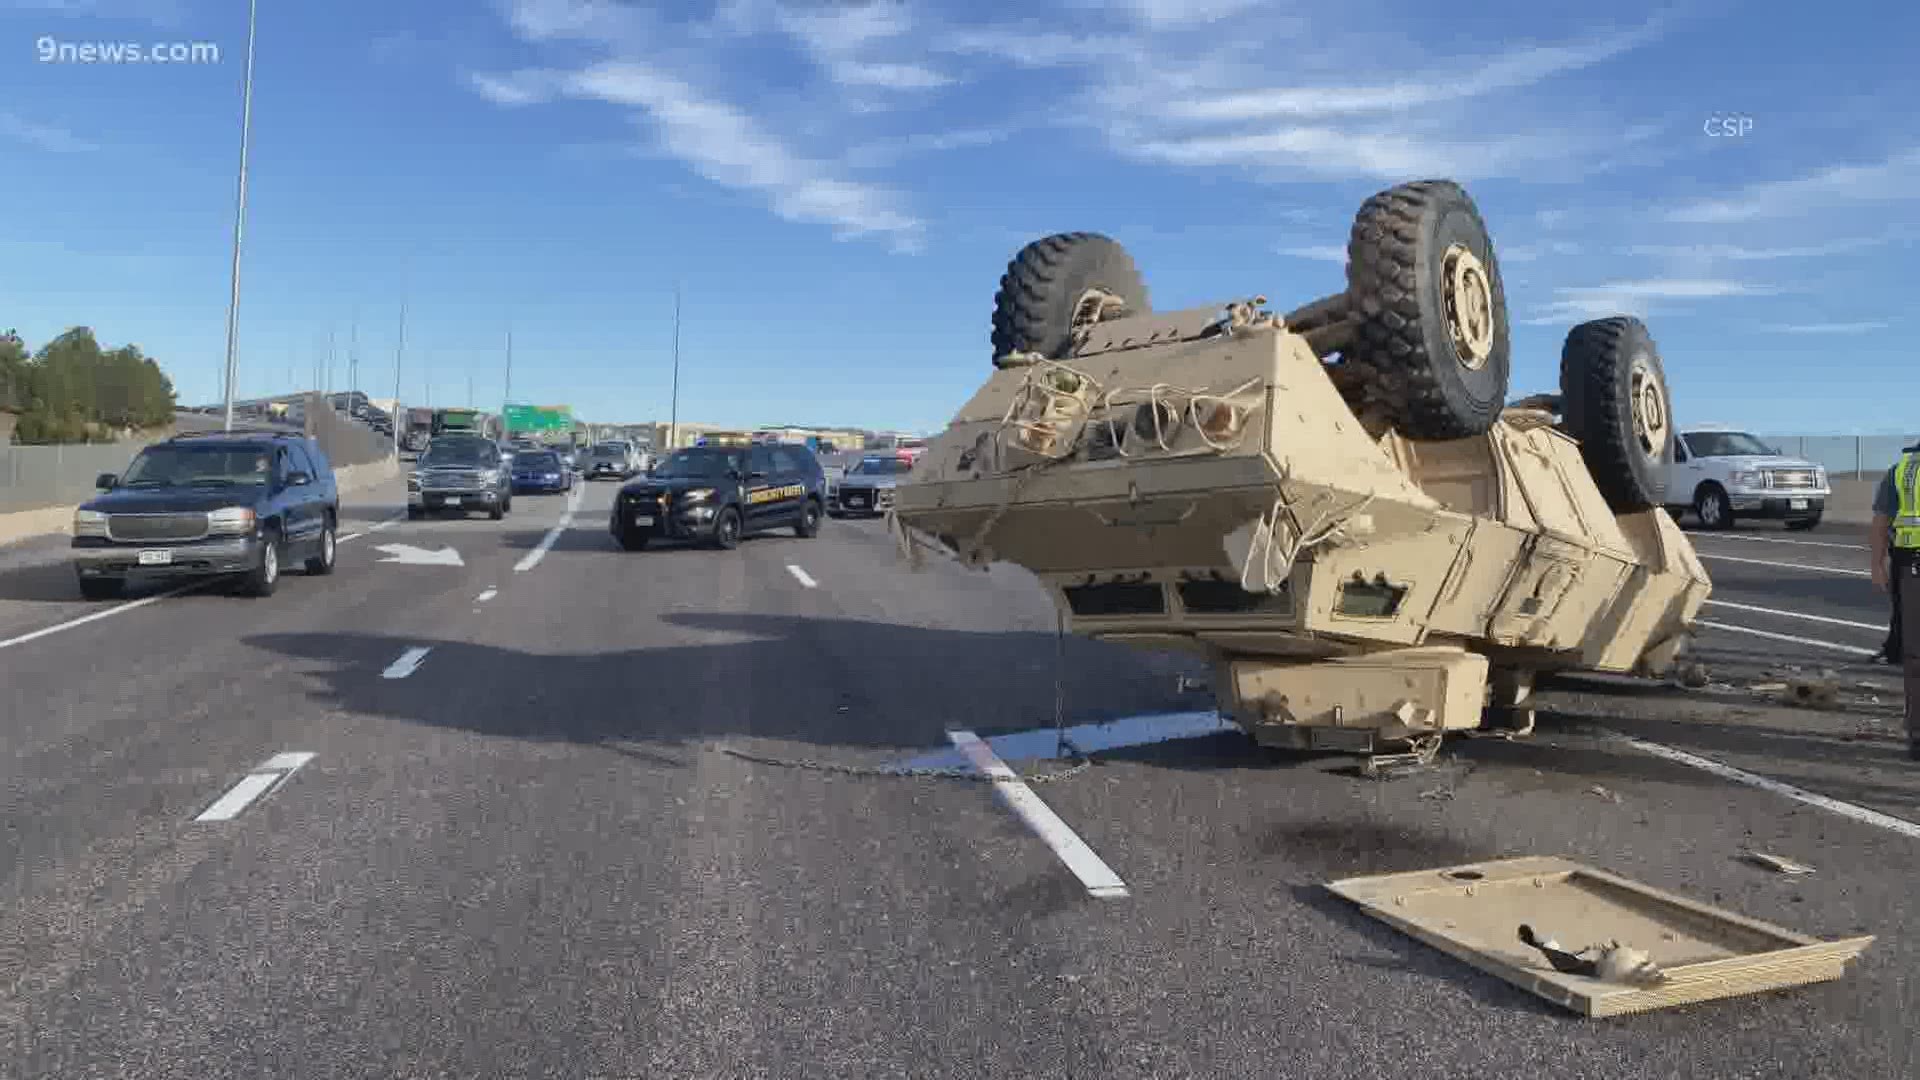 An armored military carrier fell off a semi-truck and landed upside down in the middle of the road.